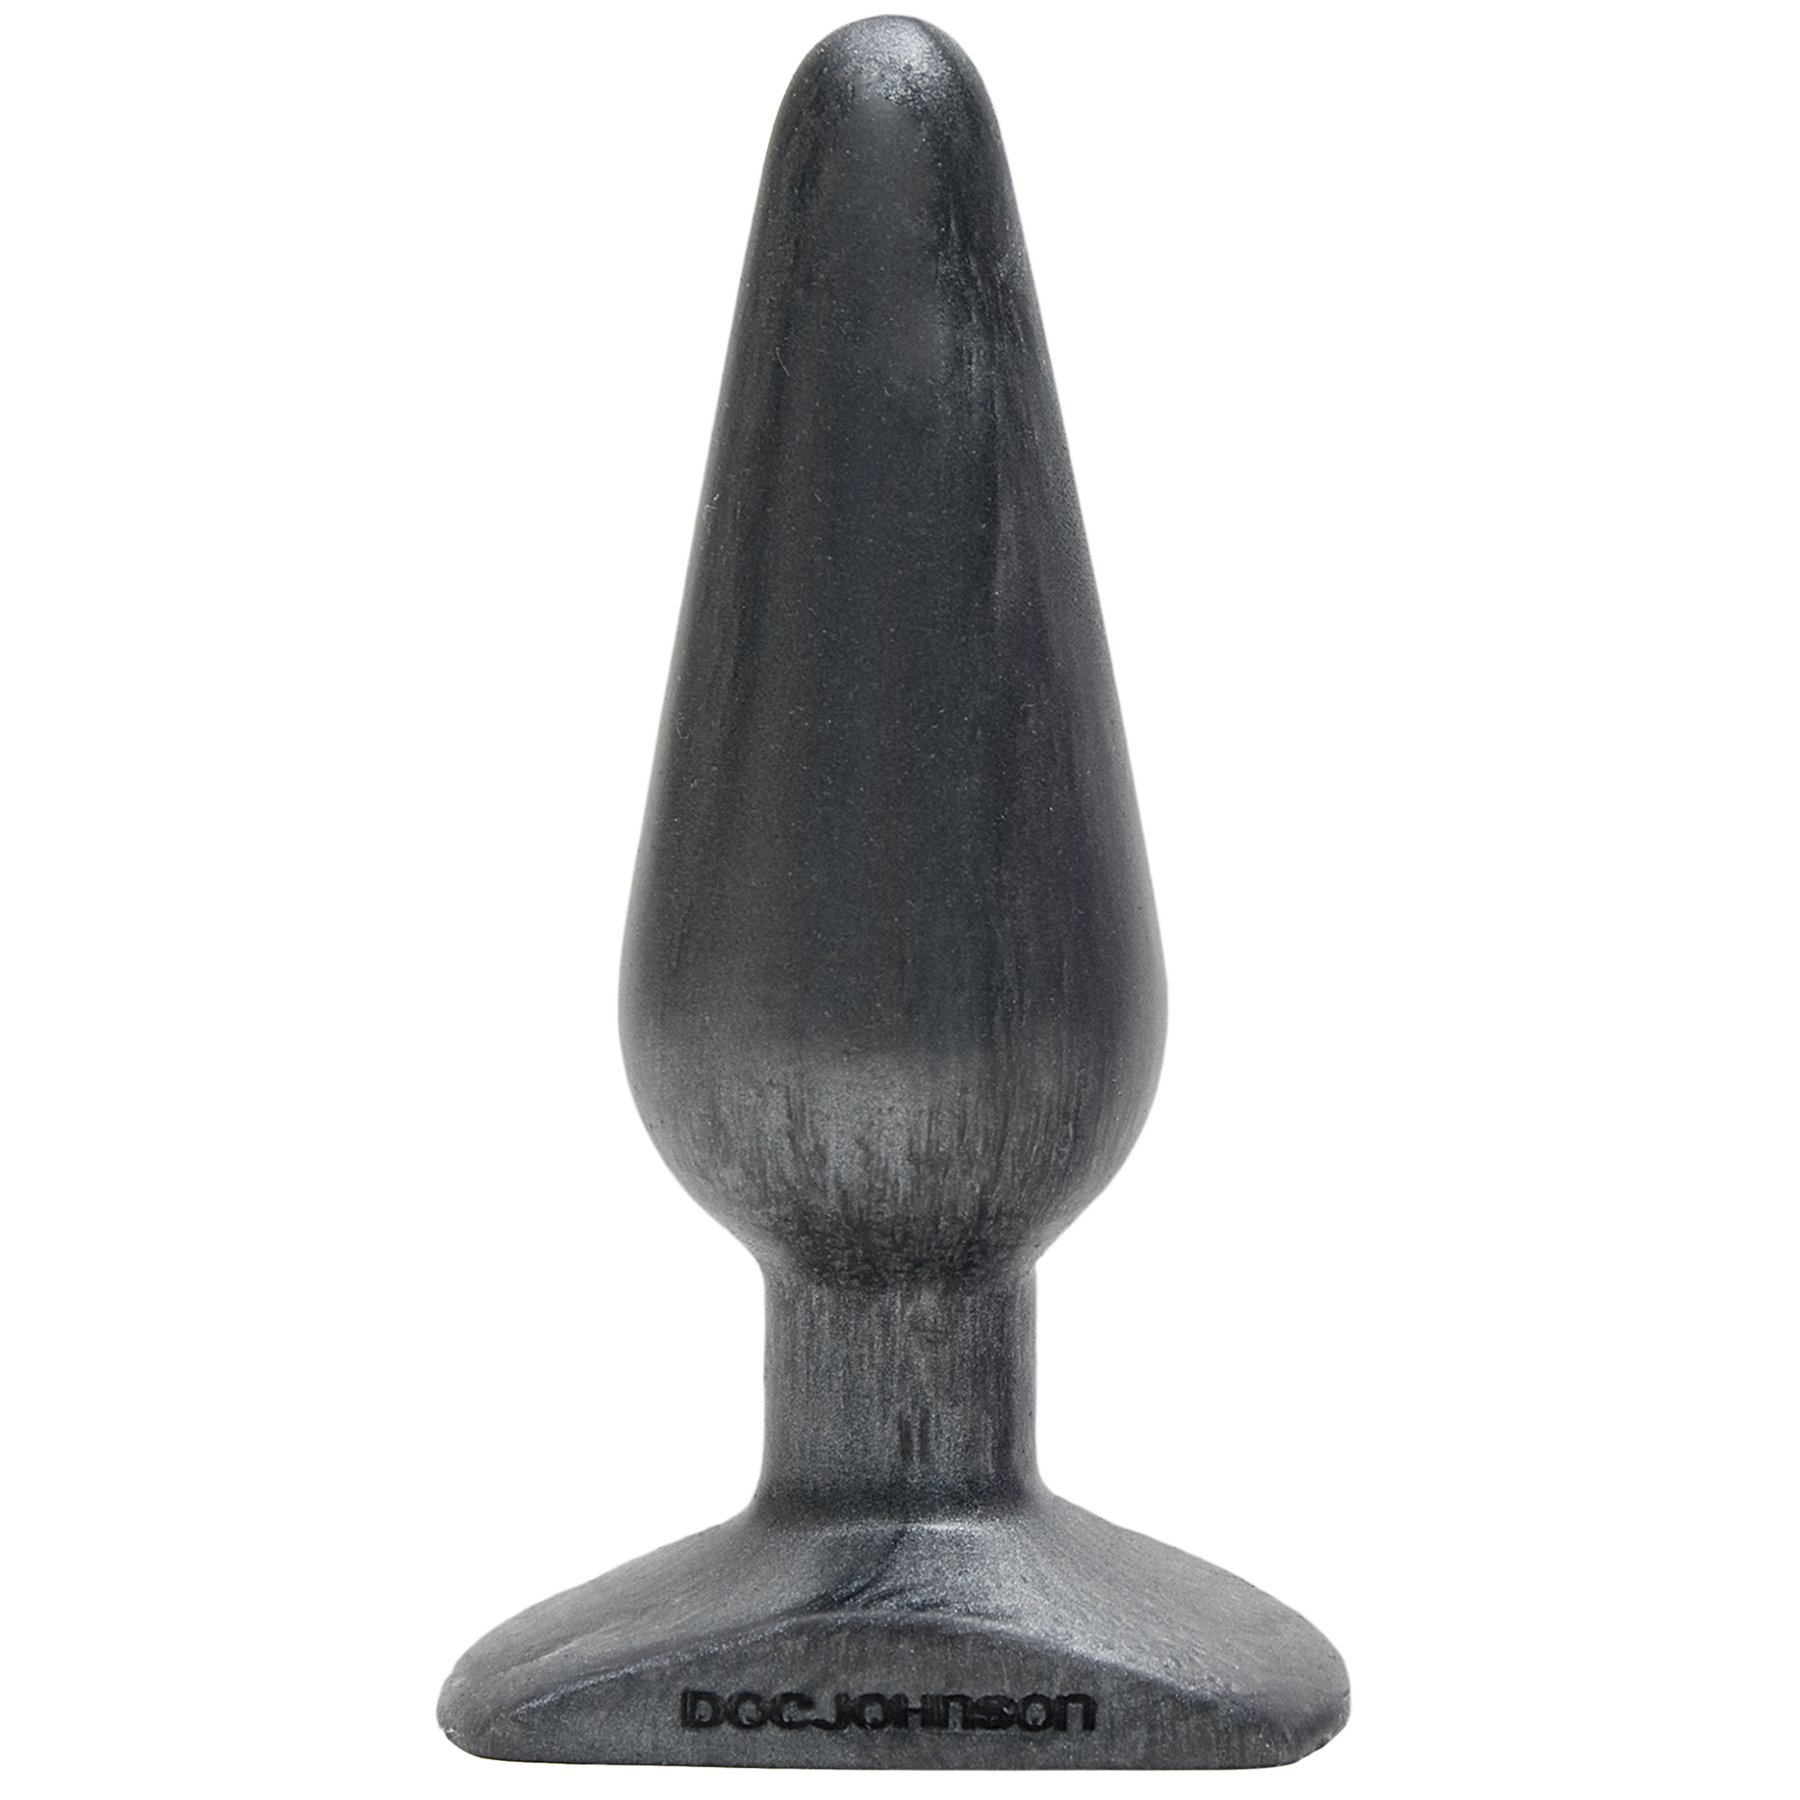 Platinum Premium Silicone The Big End - Charcoal - Thorn & Feather Sex Toy Canada